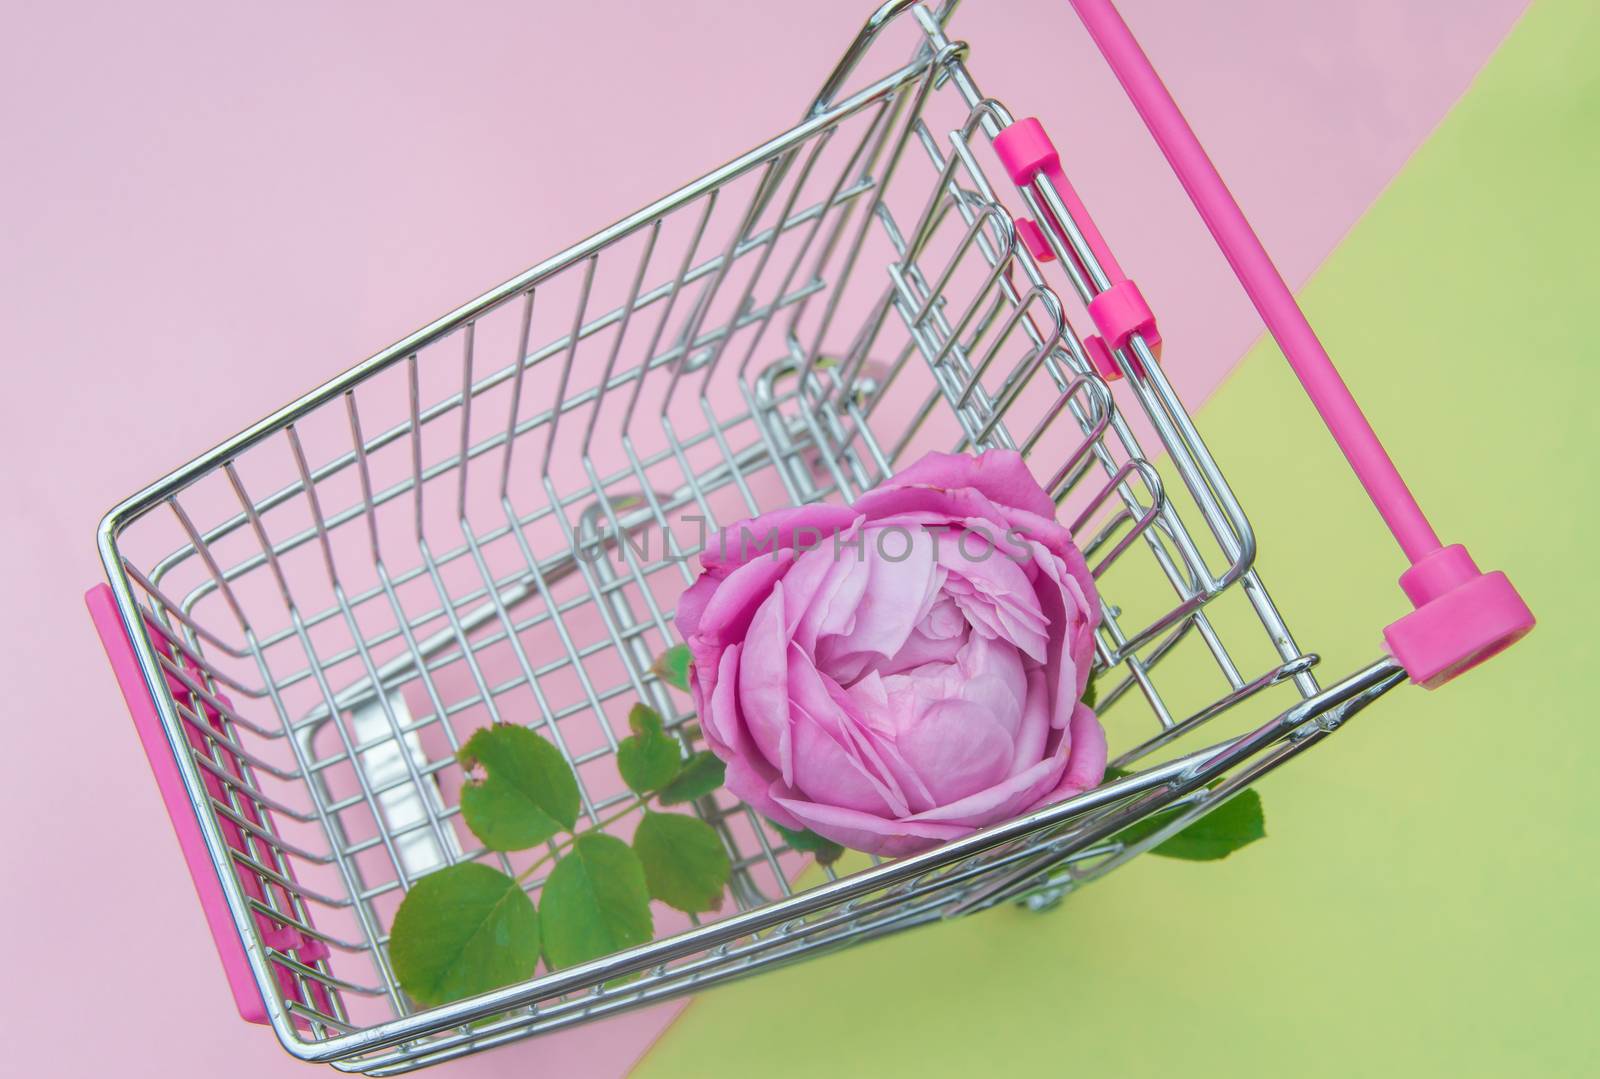 One beautiful pink rose on a shopping cart.